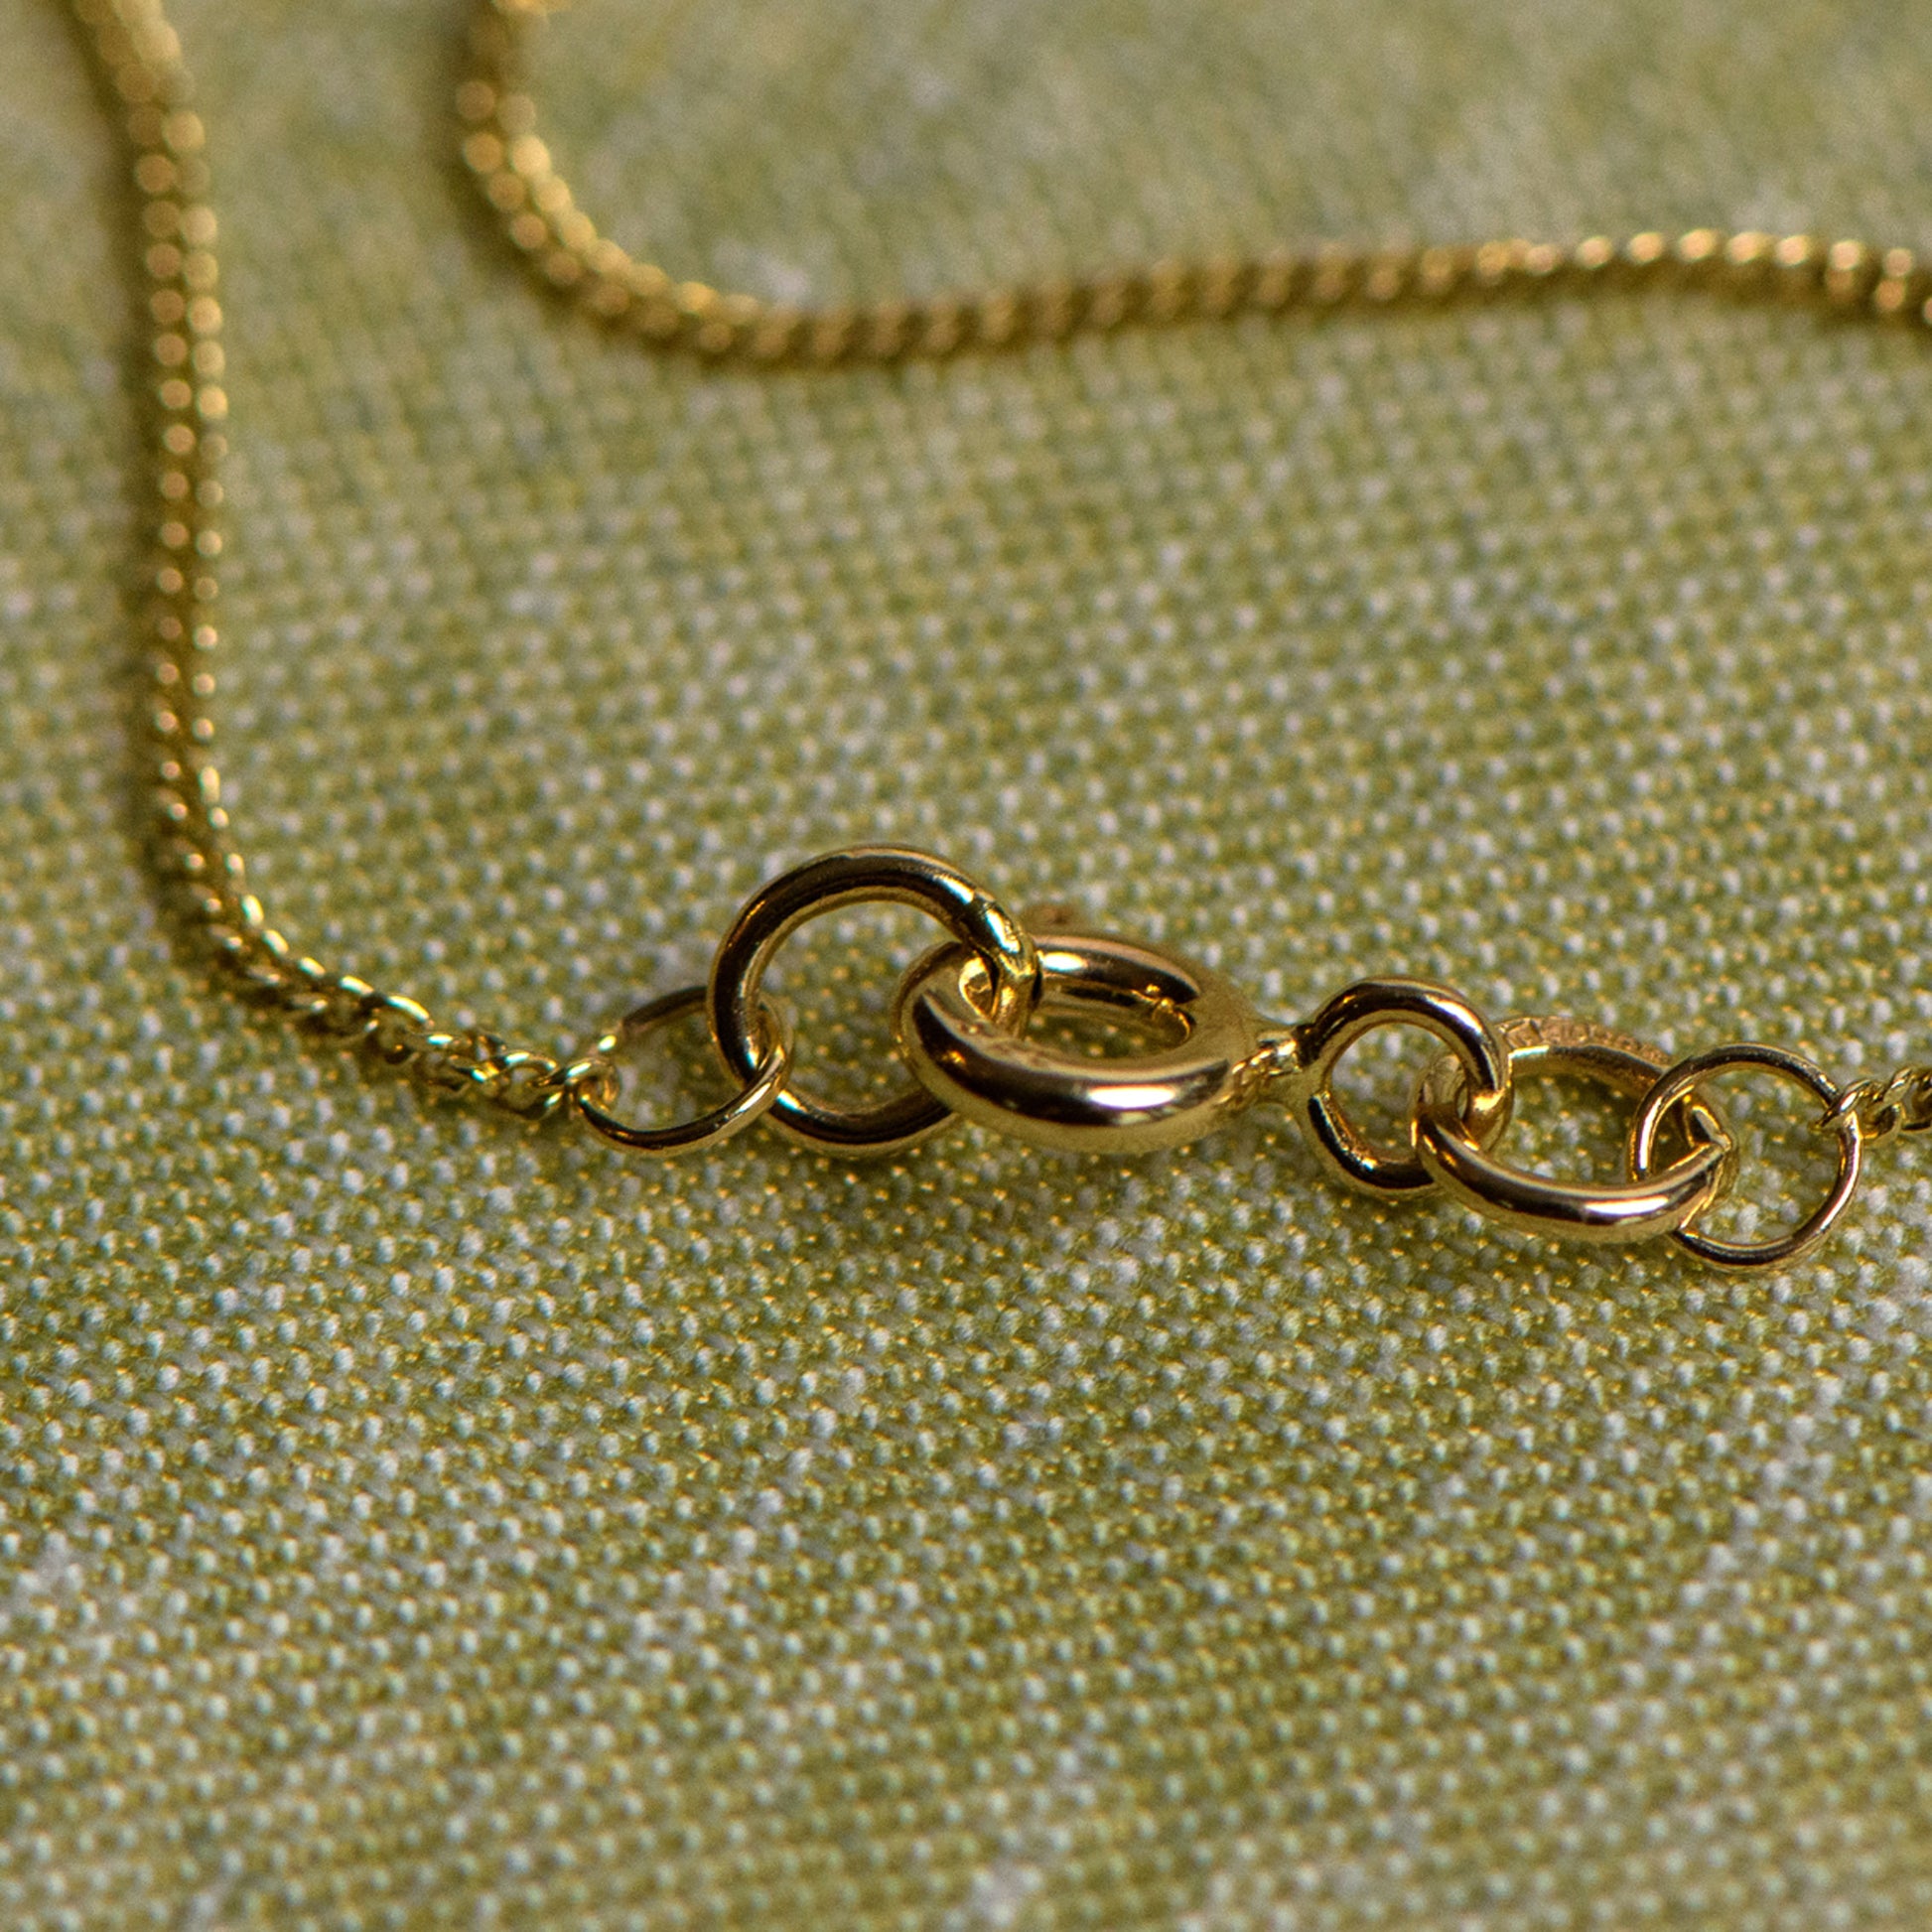 9ct gold curb chain by Notion Jewellery